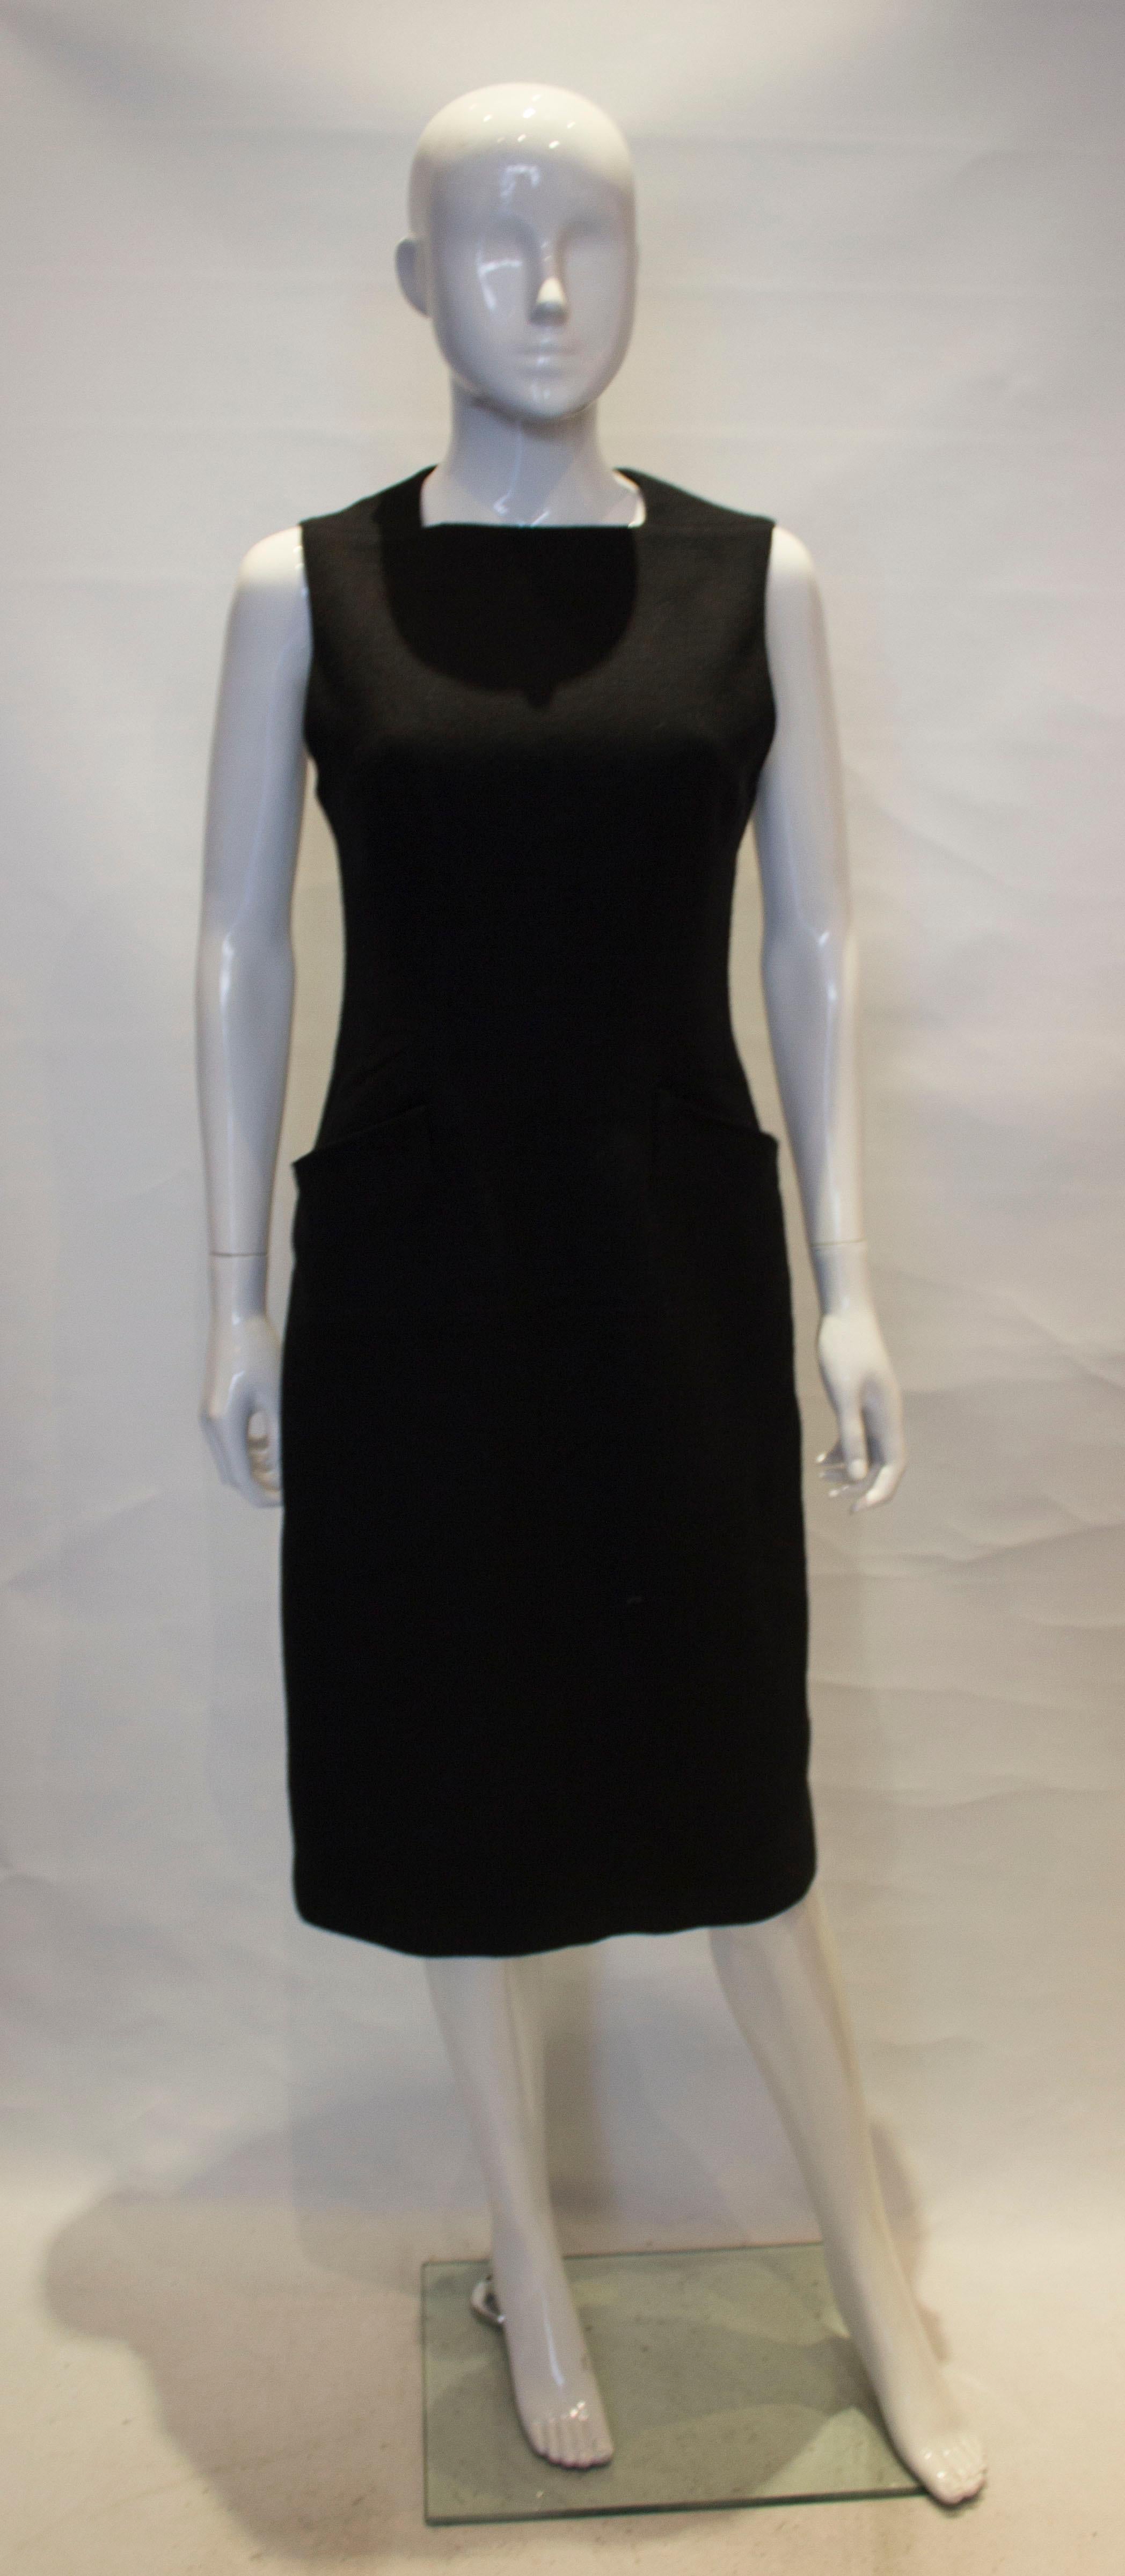 A chic shift dress by Proenza Schouer, The dress has a a square neckline, pockets at hip leval, a 6 1/2 '' slit at the back and a central back zip. Labelled US size 4.